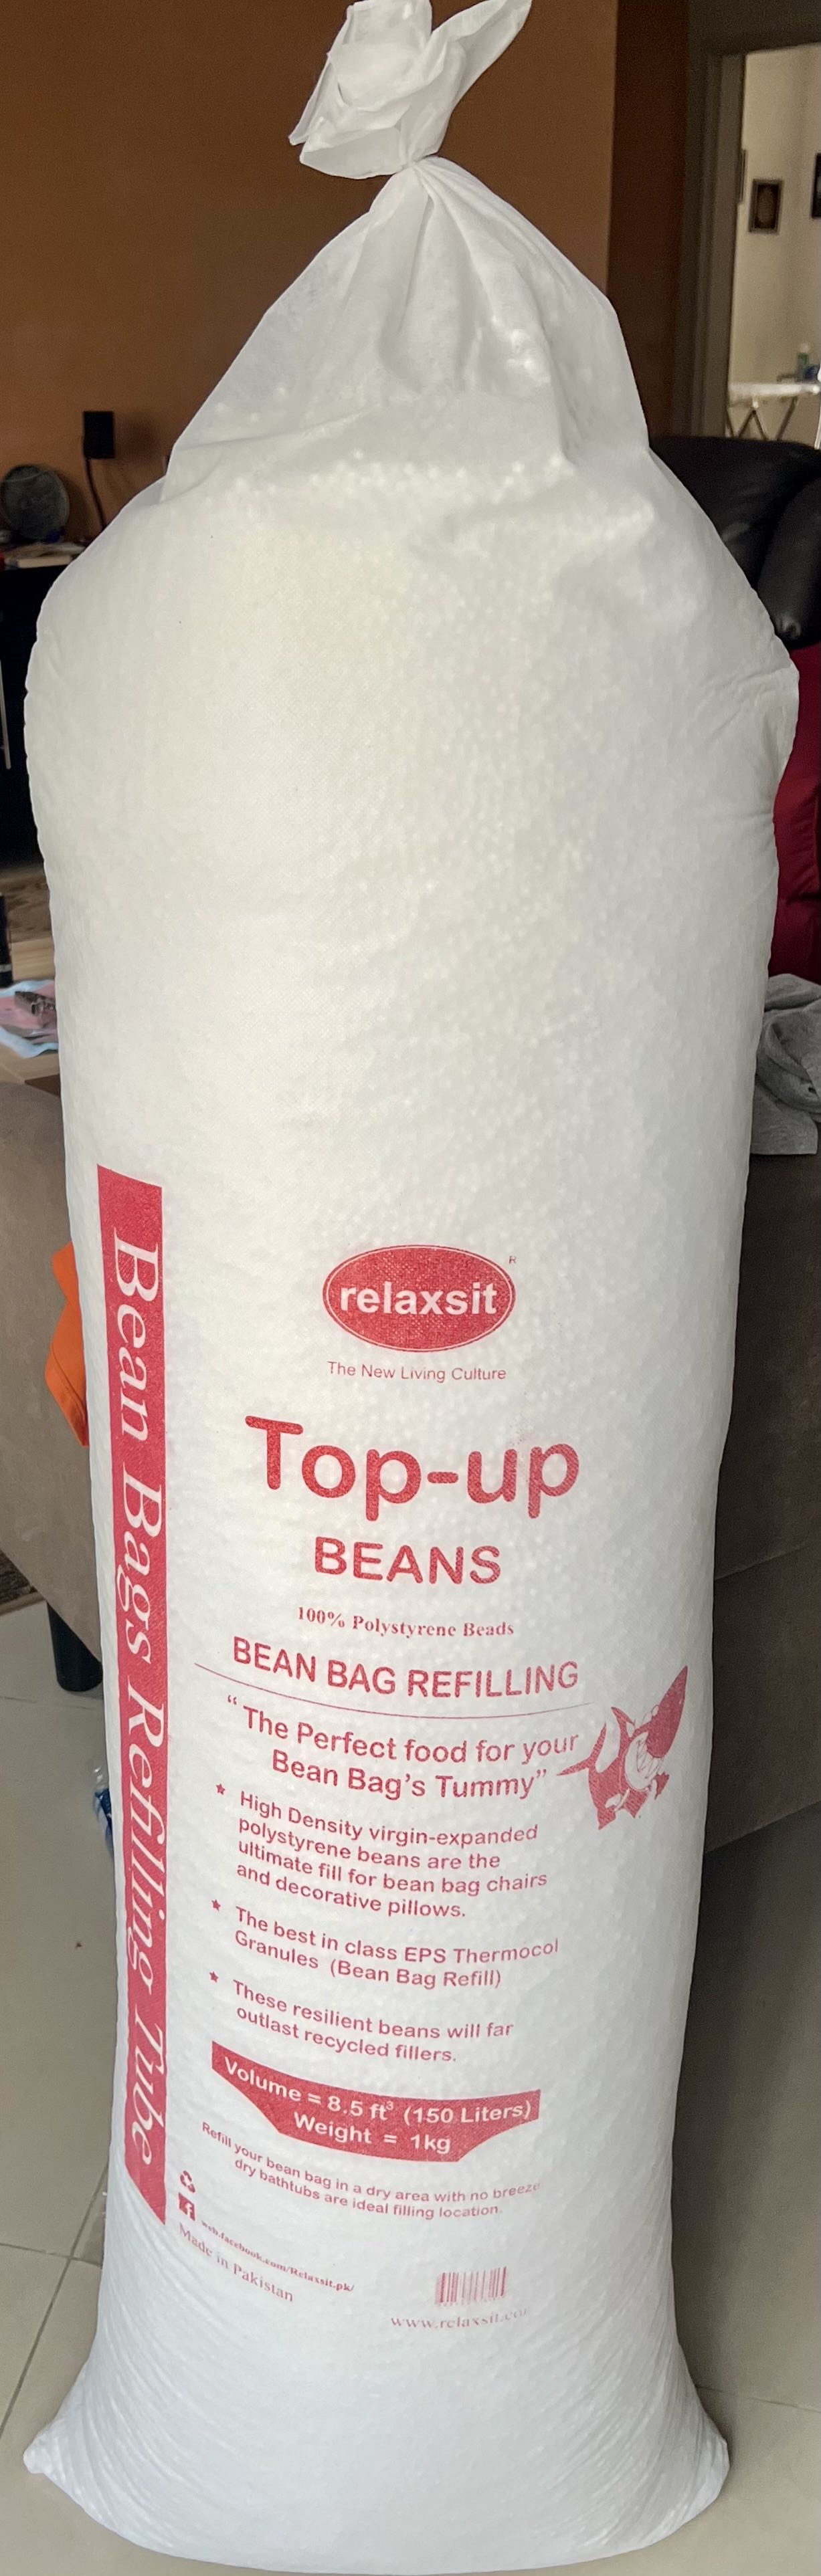 Relaxsit beans refilling Polystyrene Beads refill -BeanBag Refilling - bean  bag refill - beanbags filling -beanbag re-filling for living room furniture  Available in 0.5, 1, 2, and 4kg Packets